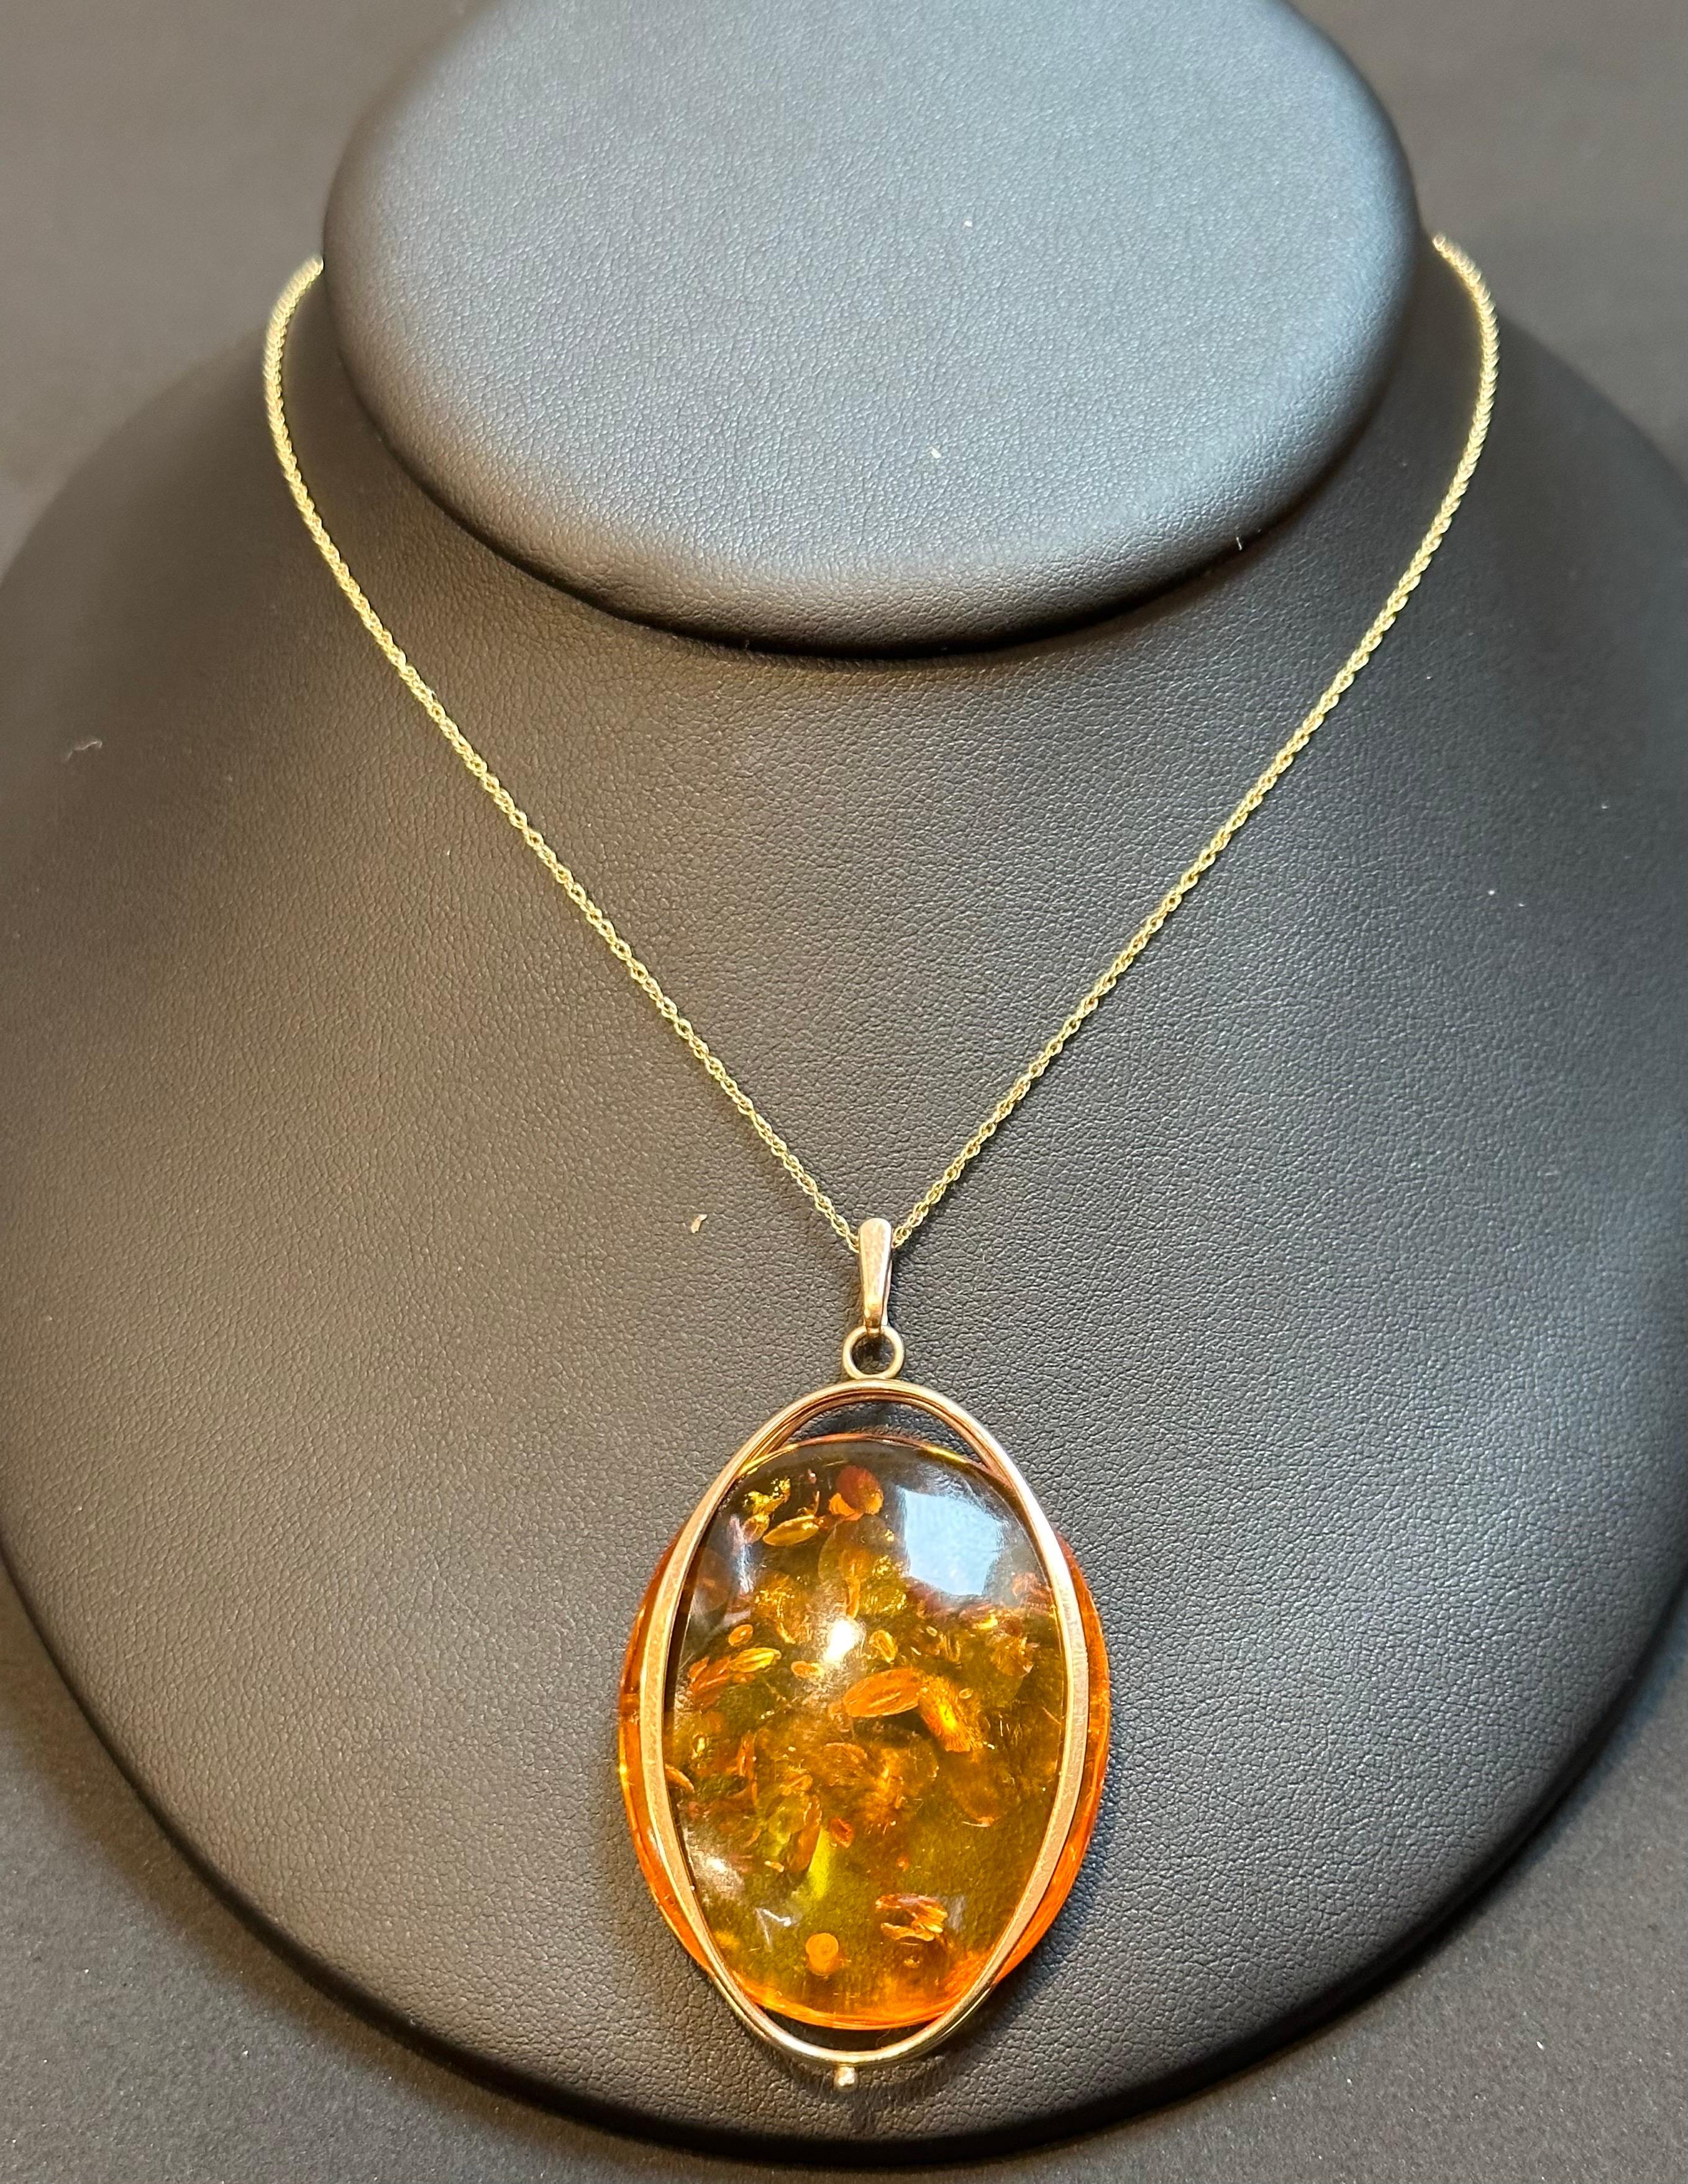 Cabochon Large Natural Russian Amber Necklace or Pendant in 14 Karat Yellow Gold + Chain